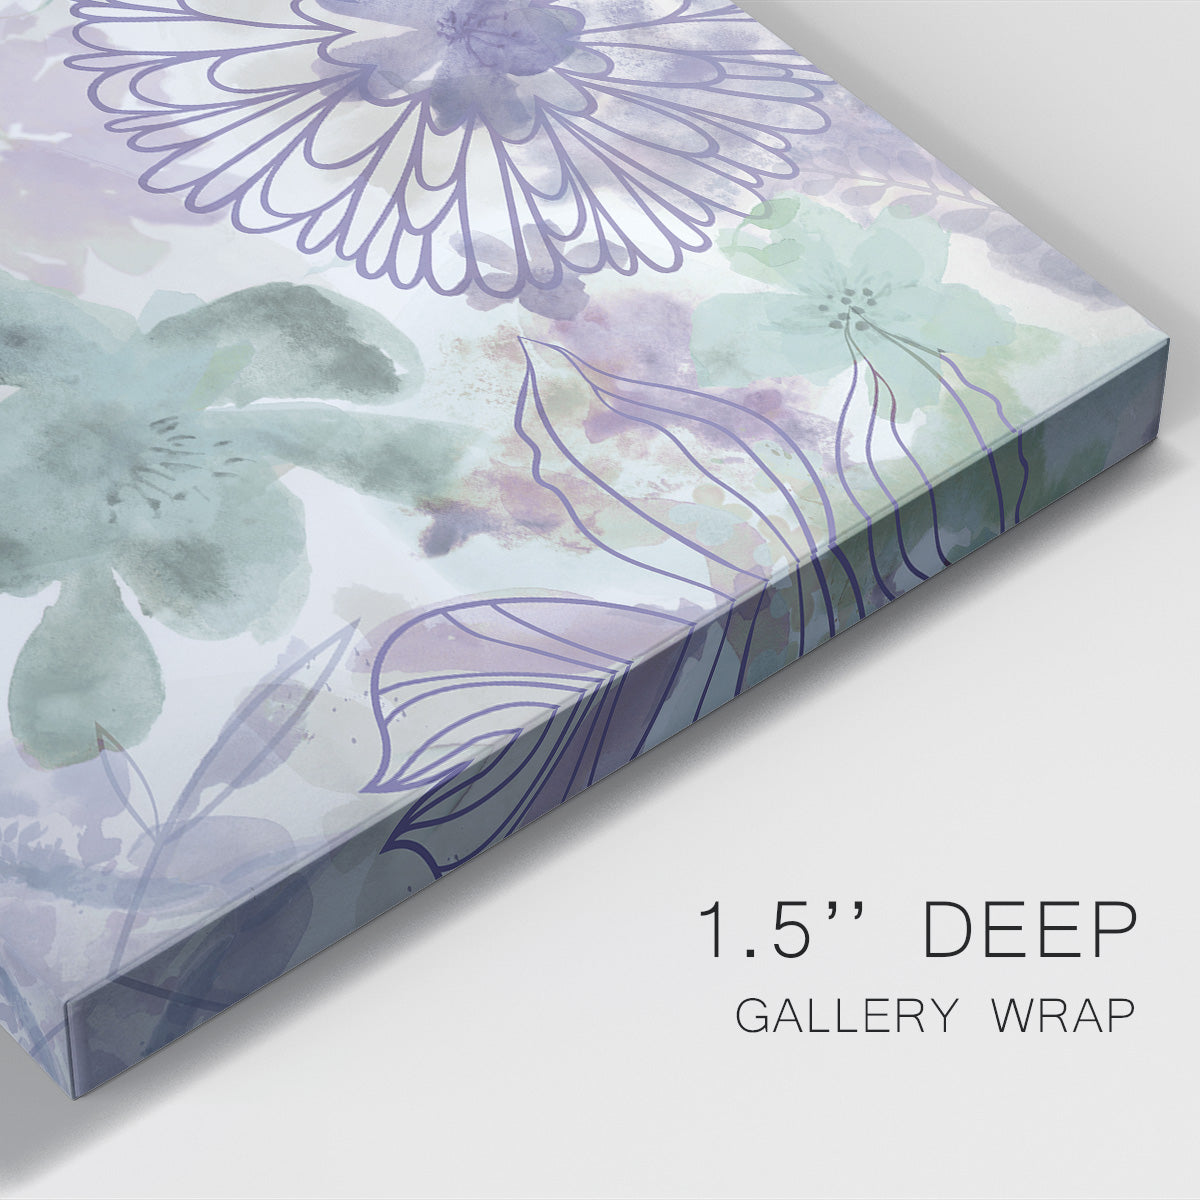 Bouquet of Dreams VIII Premium Gallery Wrapped Canvas - Ready to Hang